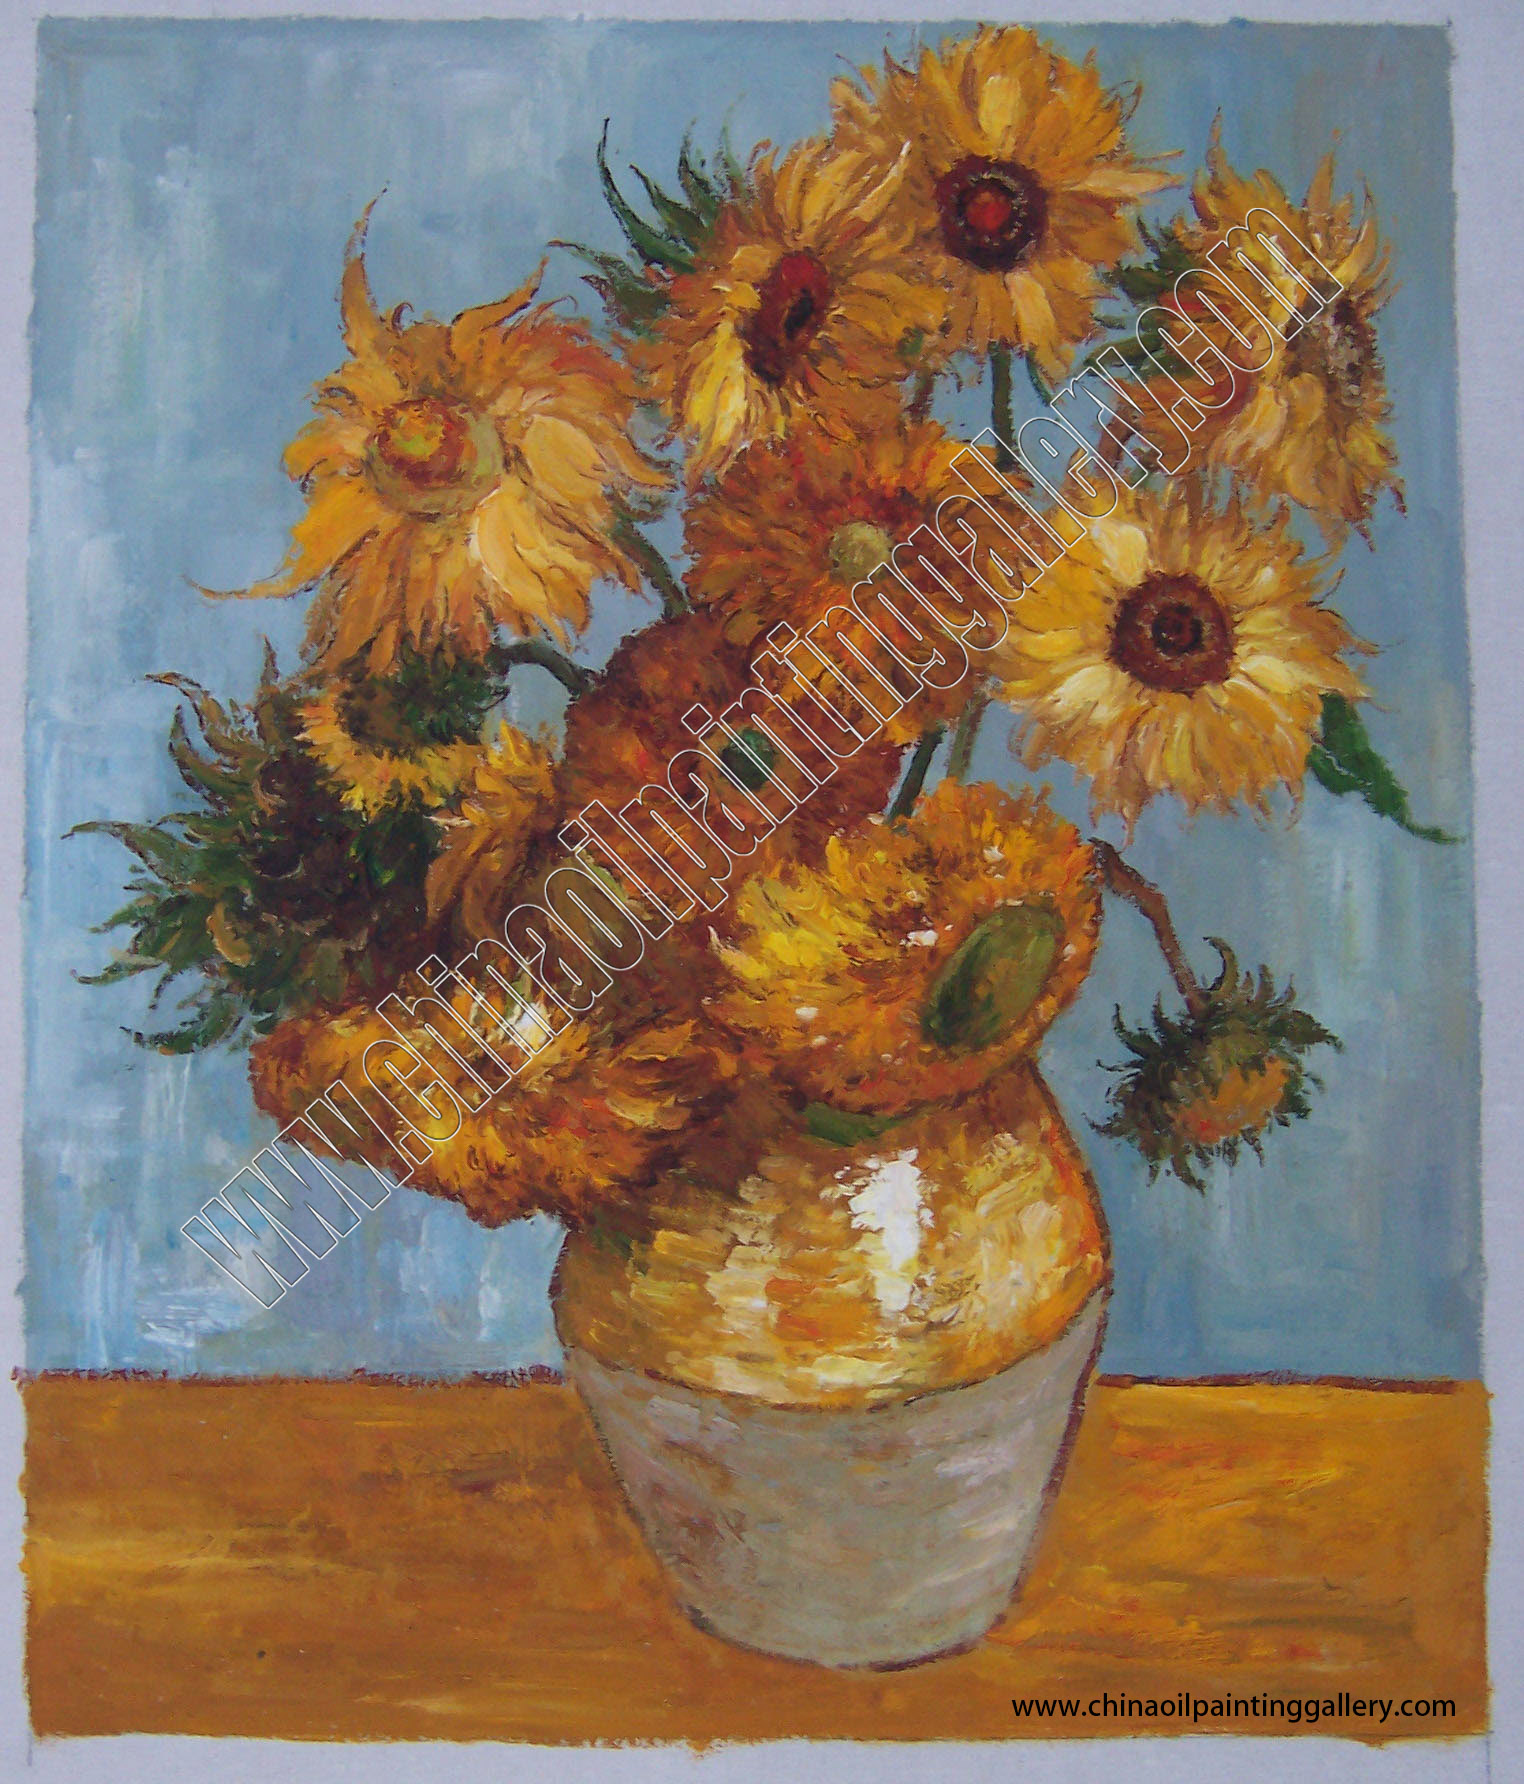 Vincent van Gogh Sunflowers - Oil painting reproductions 19